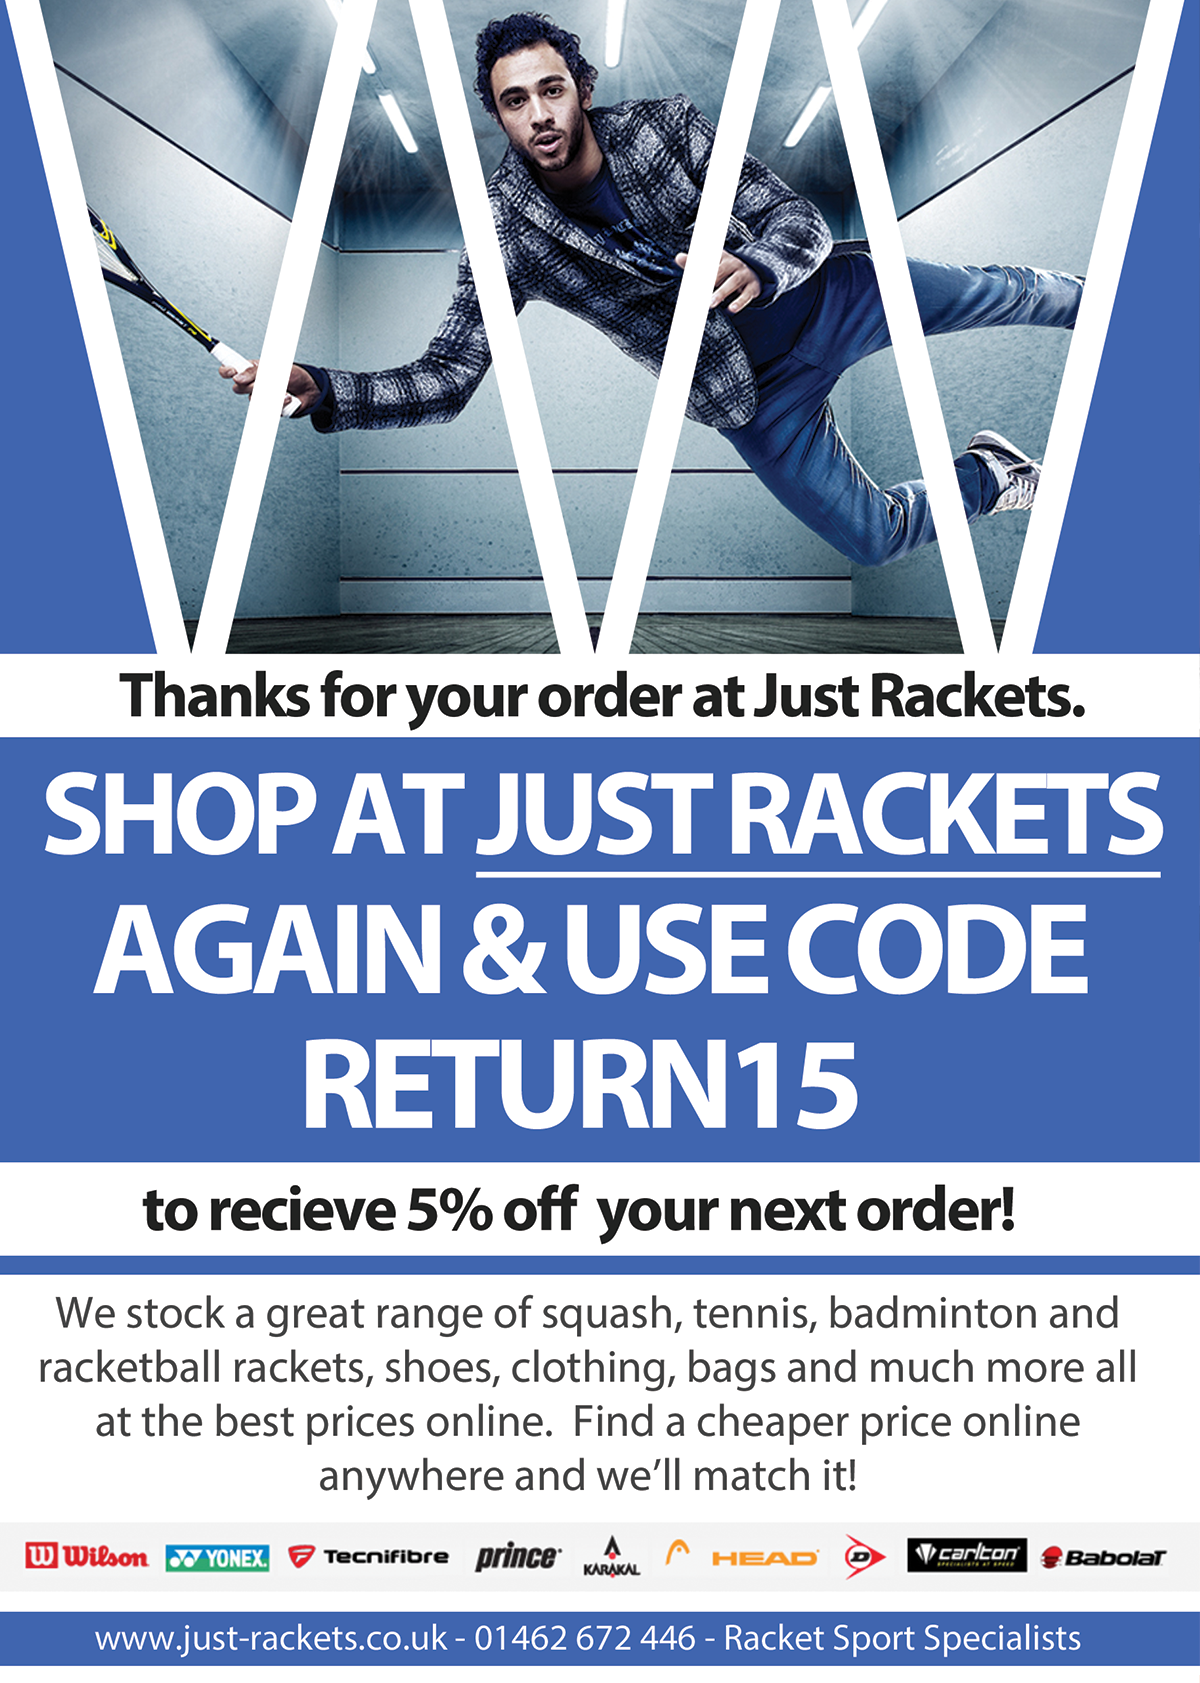 Just-Rackets-Flyer-Designed-By-Fortune-Design